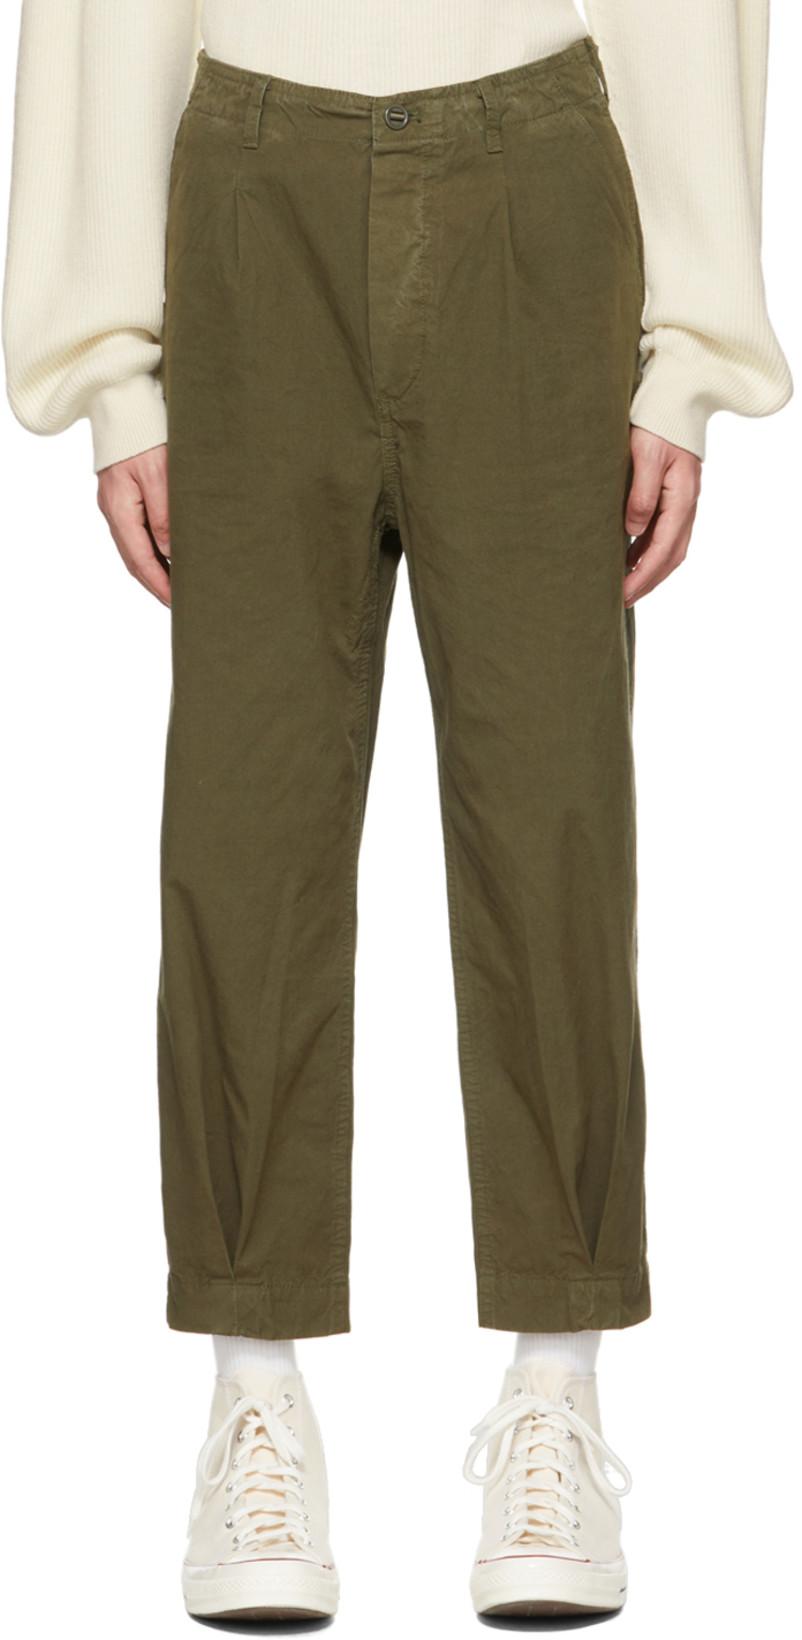 Green DM1-1 Cargo Pants by APPLIED ART FORMS